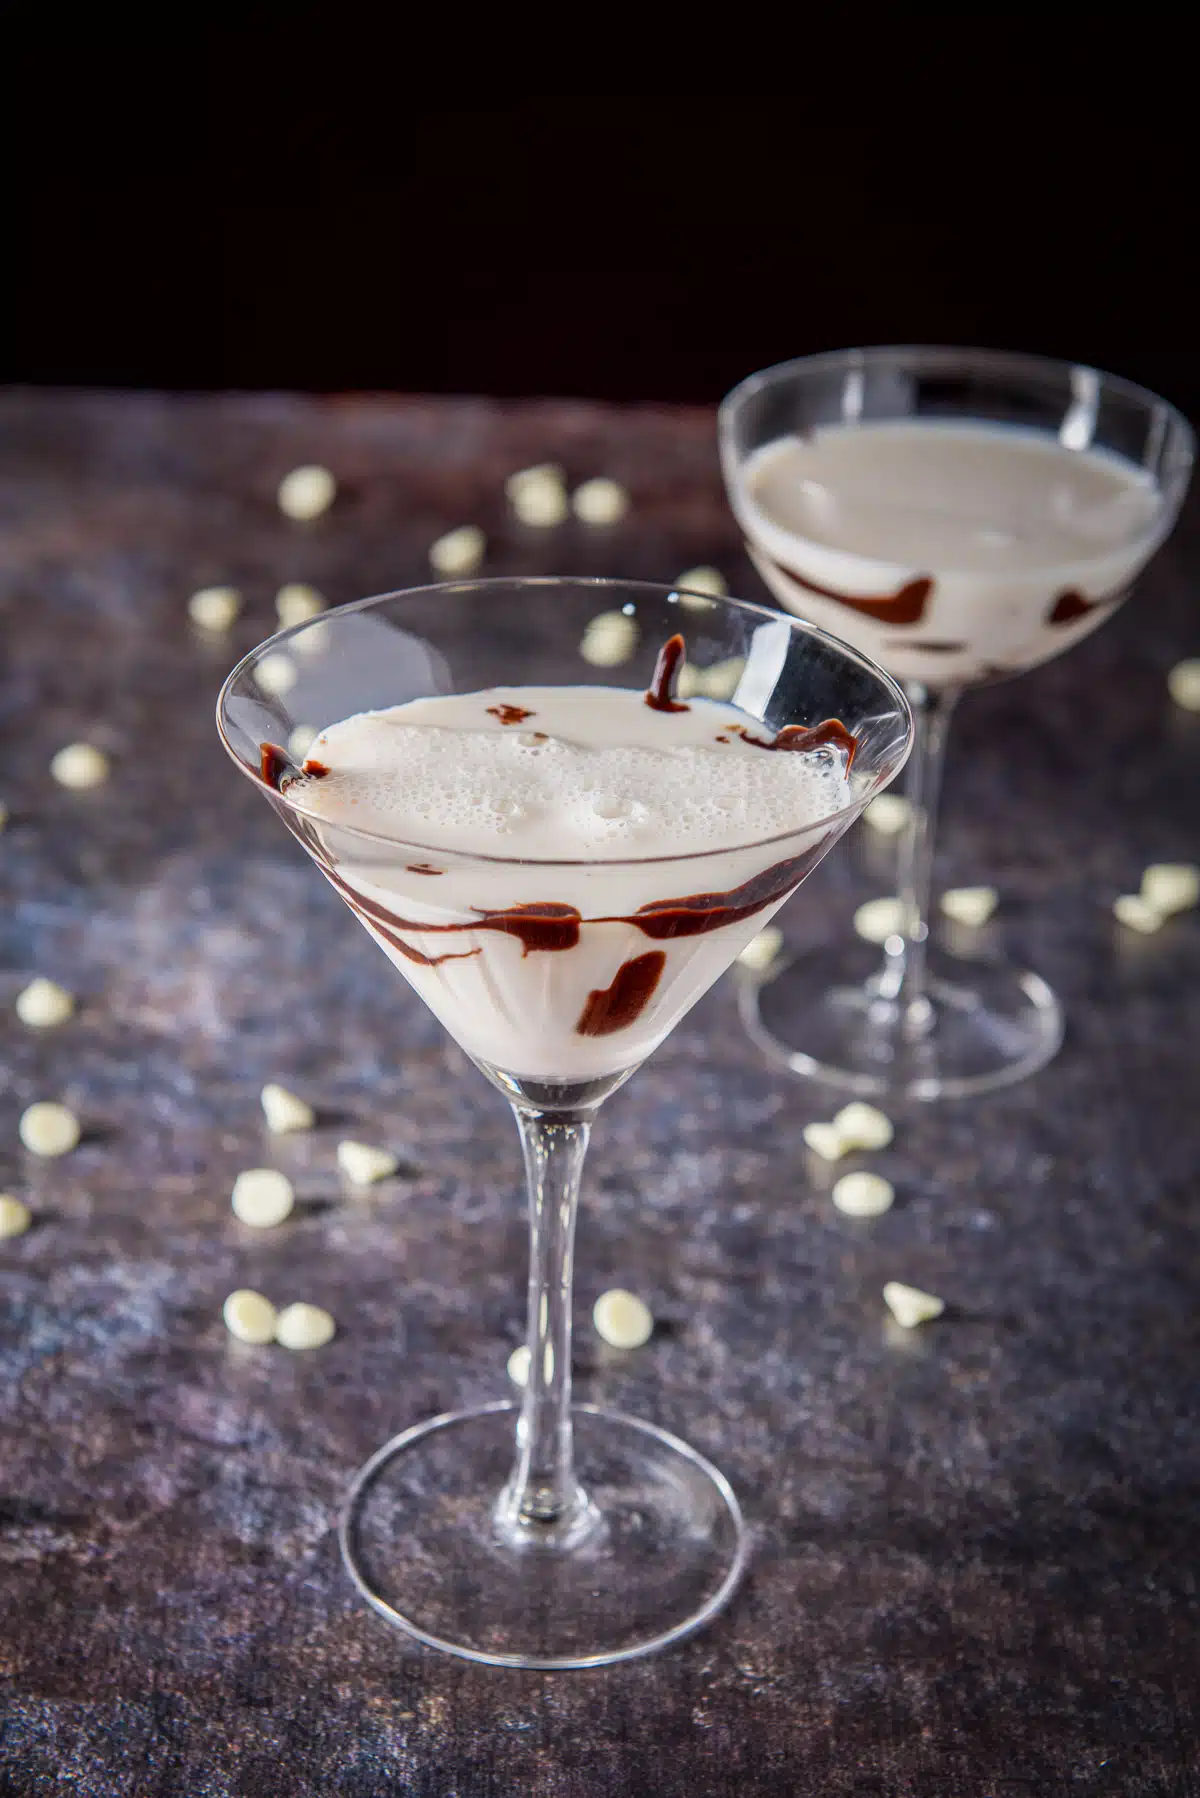 Classic martini glass filled with a milky cocktail with chocolate chips on the table